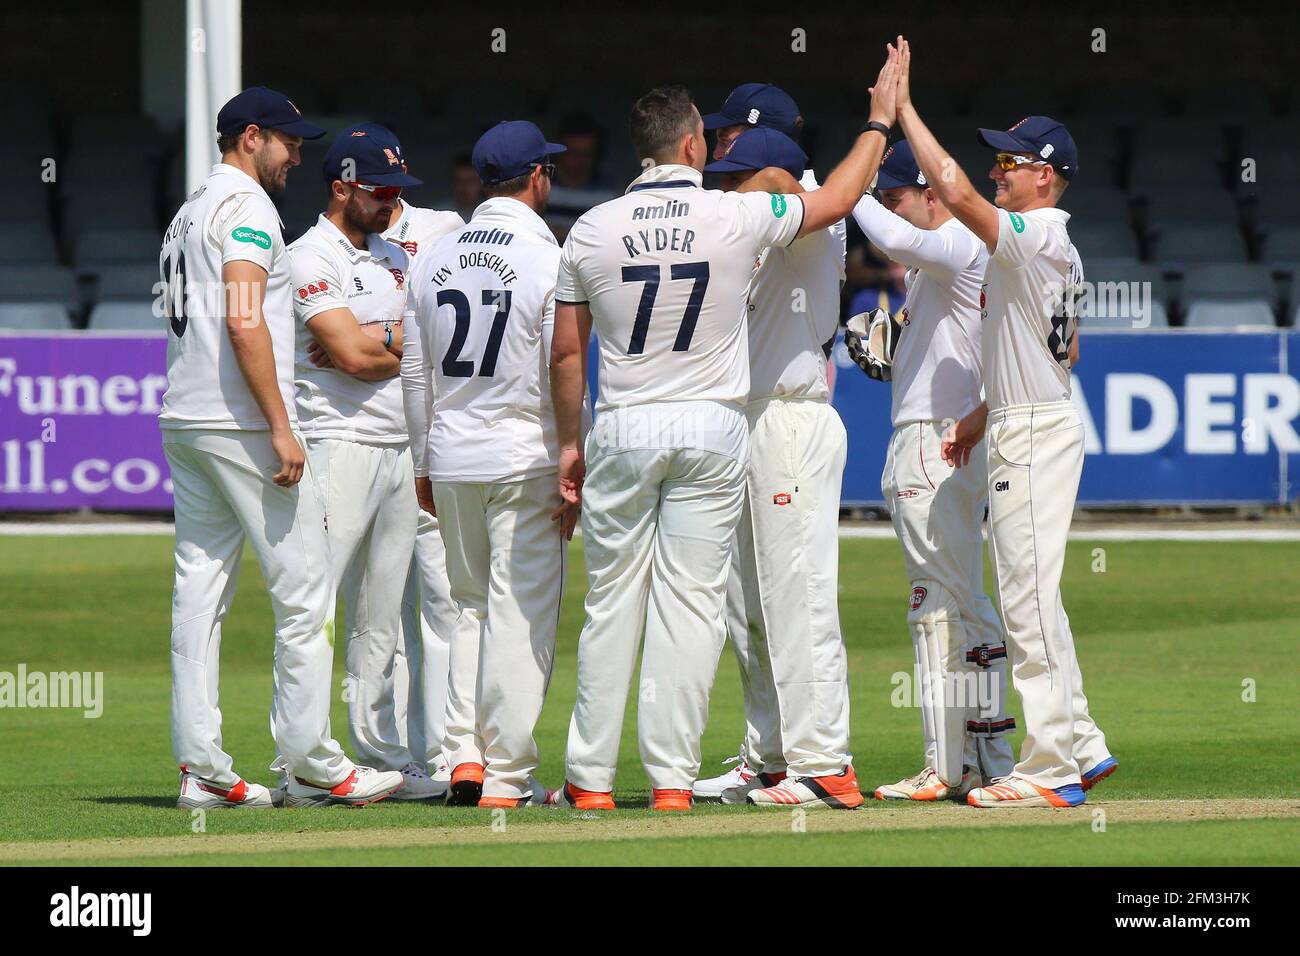 Jesse Ryder of Essex (77) is congratulated by his team mates after taking the wicket of Dinesh Chandimal of Sri Lanka during Essex CCC vs Sri Lanka, T Stock Photo